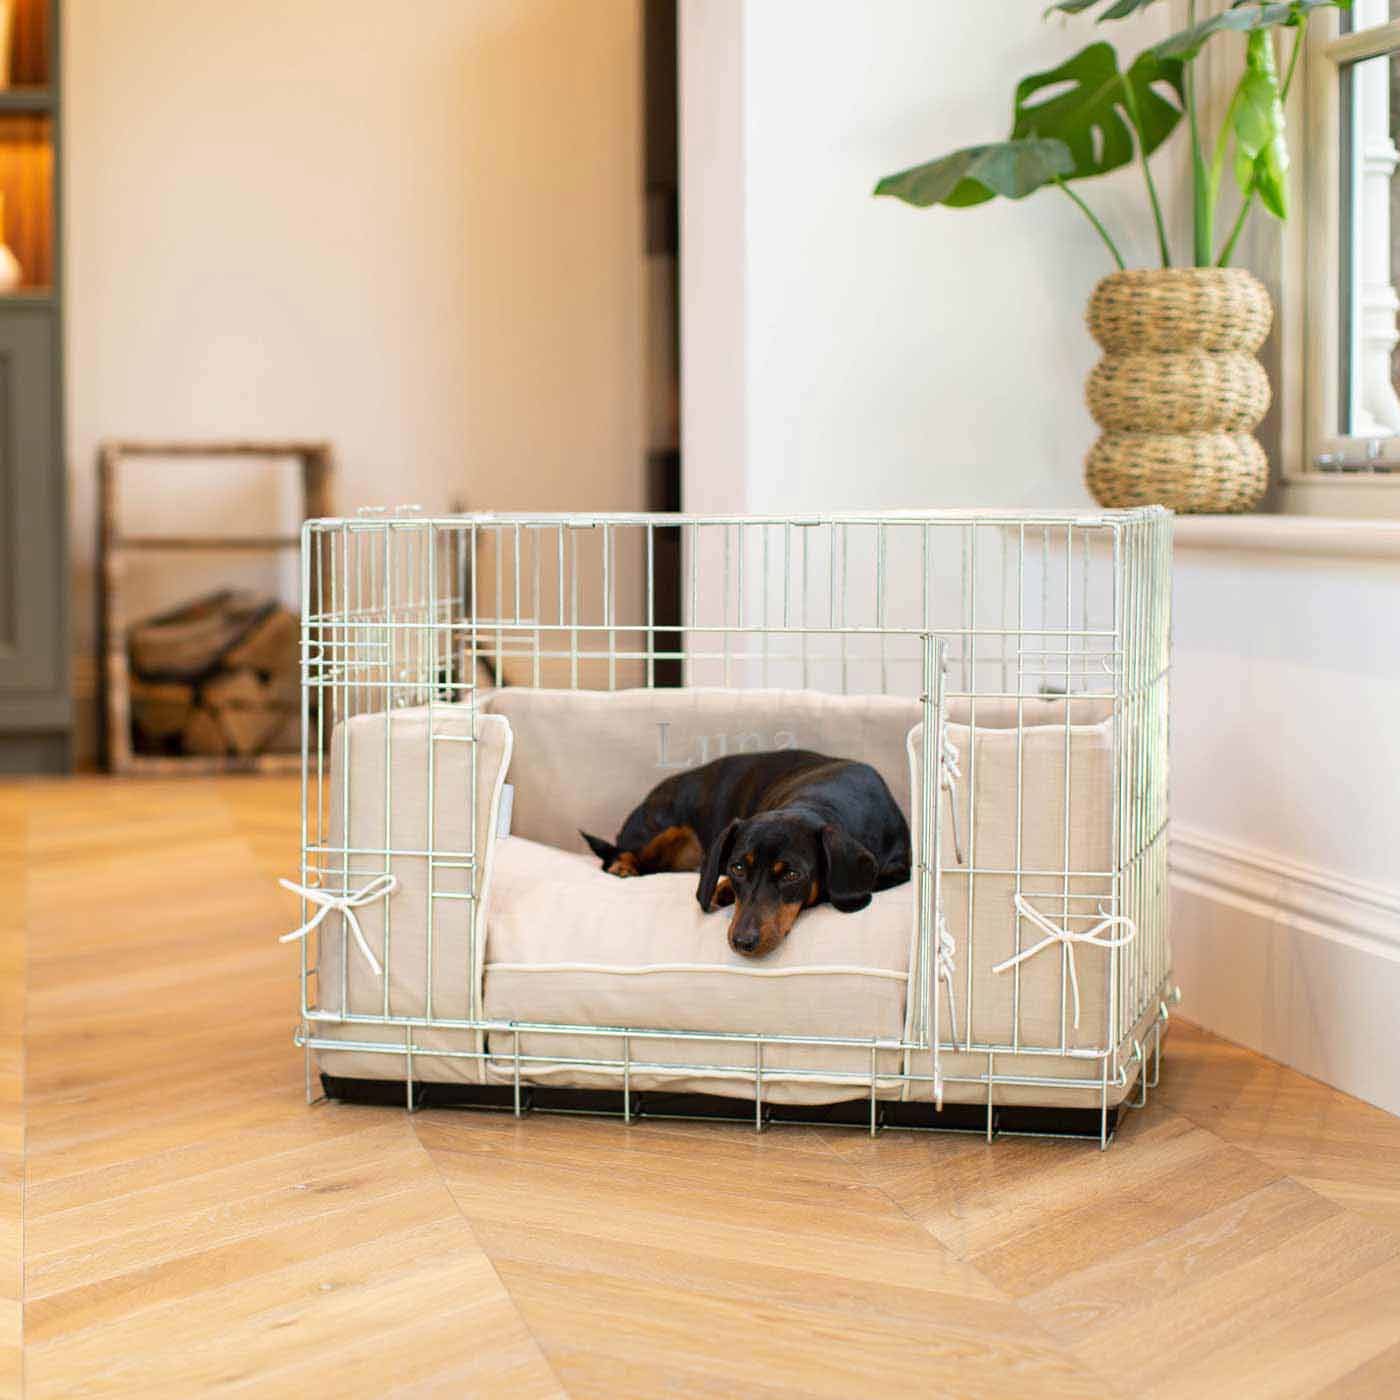 Discover our Luxury Dog Crate Bumper, in Savanna Oatmeal. The Perfect Dog Crate Accessory, Available To Personalise Now at Lords & Labradors